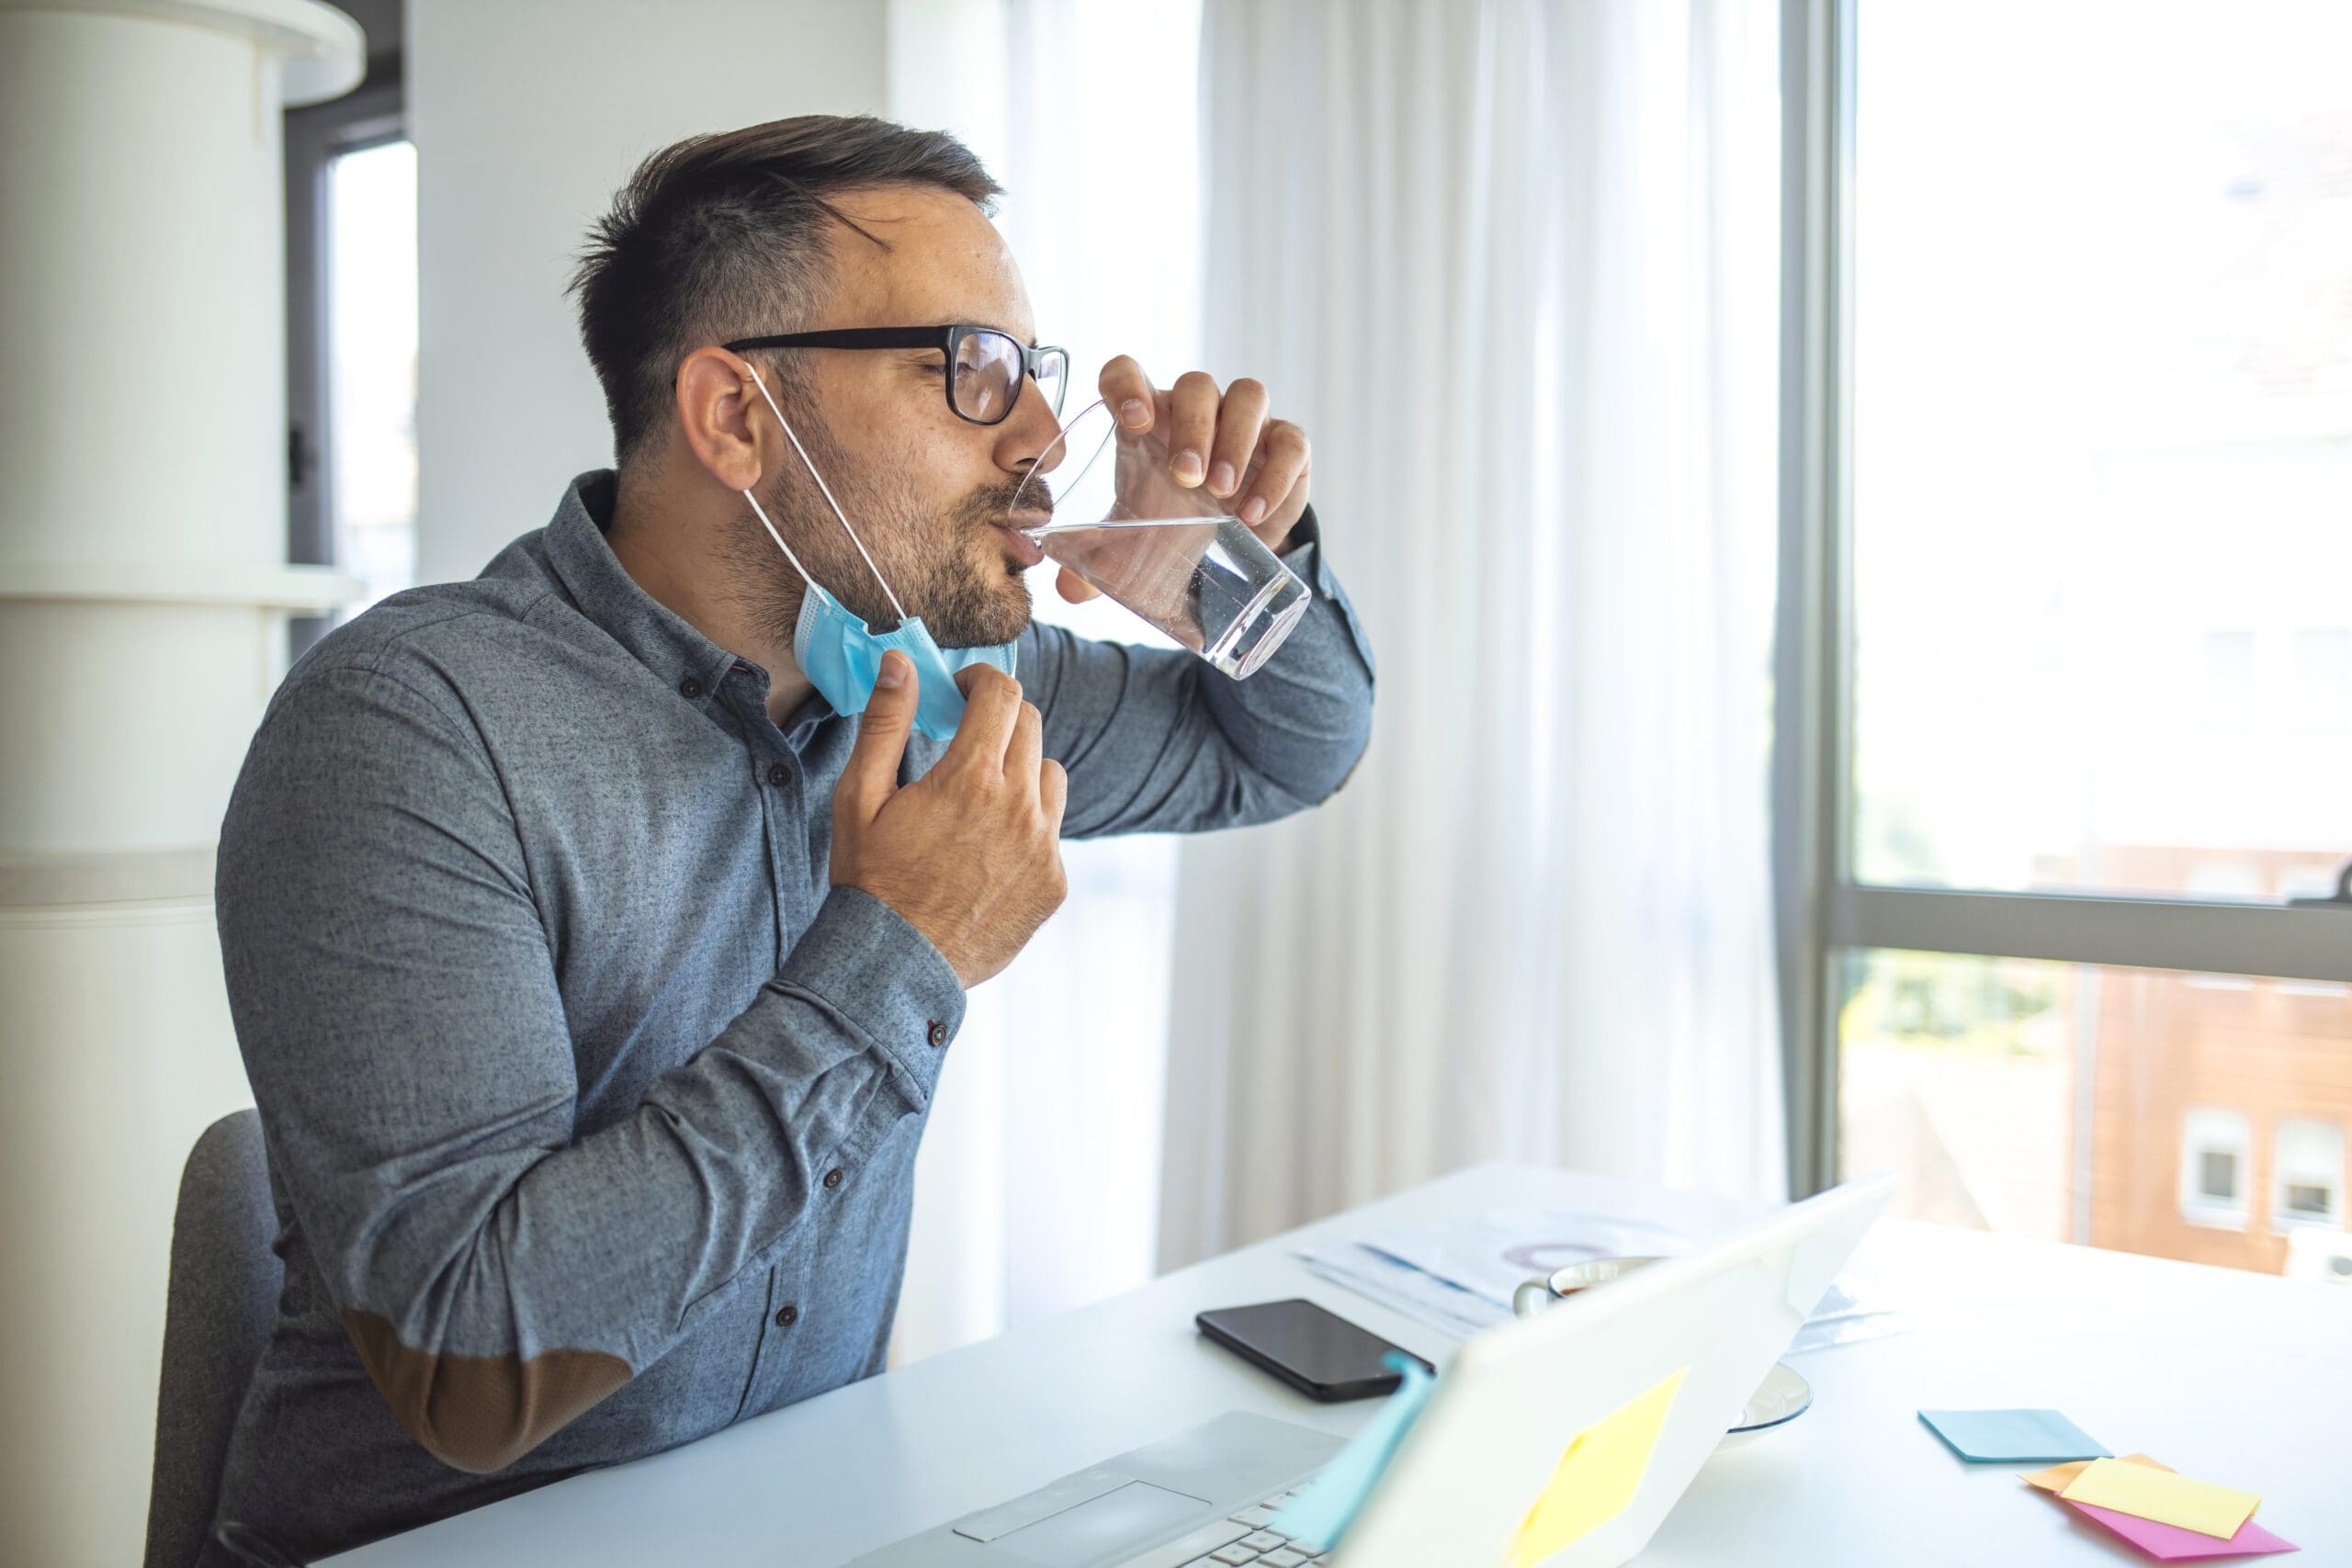 Businessman with mask drinking water at work. Staying hydrated on his business. Businessman having a glass of water while working in office and looking away - dehydration, drink enough liquids throughout the day